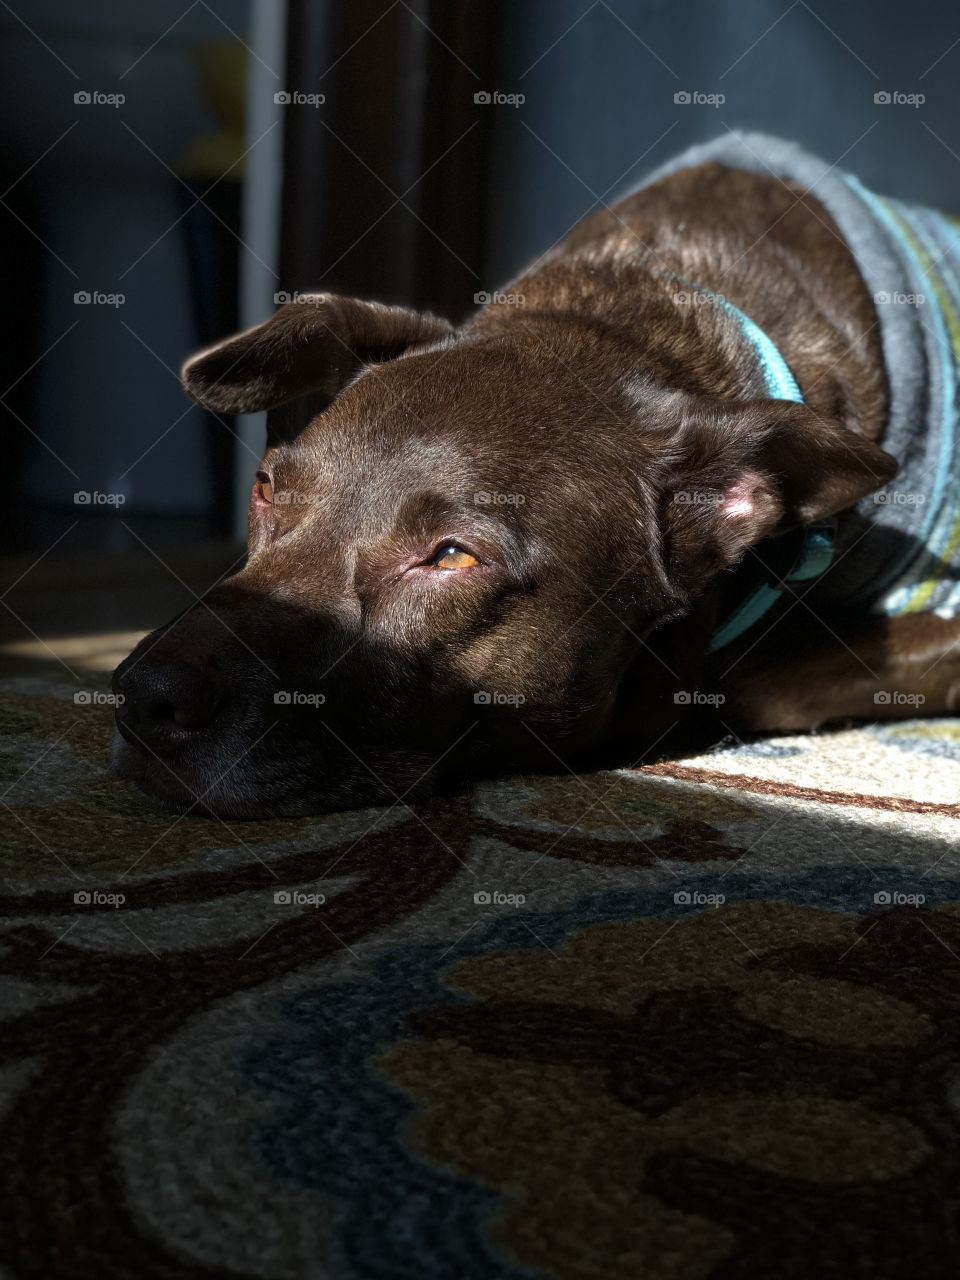 This is my beautiful boy, Jiffy! In this photo he is wearing his favorite blue and green pattern sweater while enjoying some sun. I took this photo with the iPhone 8 Plus. Also, I have not edited this photo at all..my camera and dog are to thank. ❤️